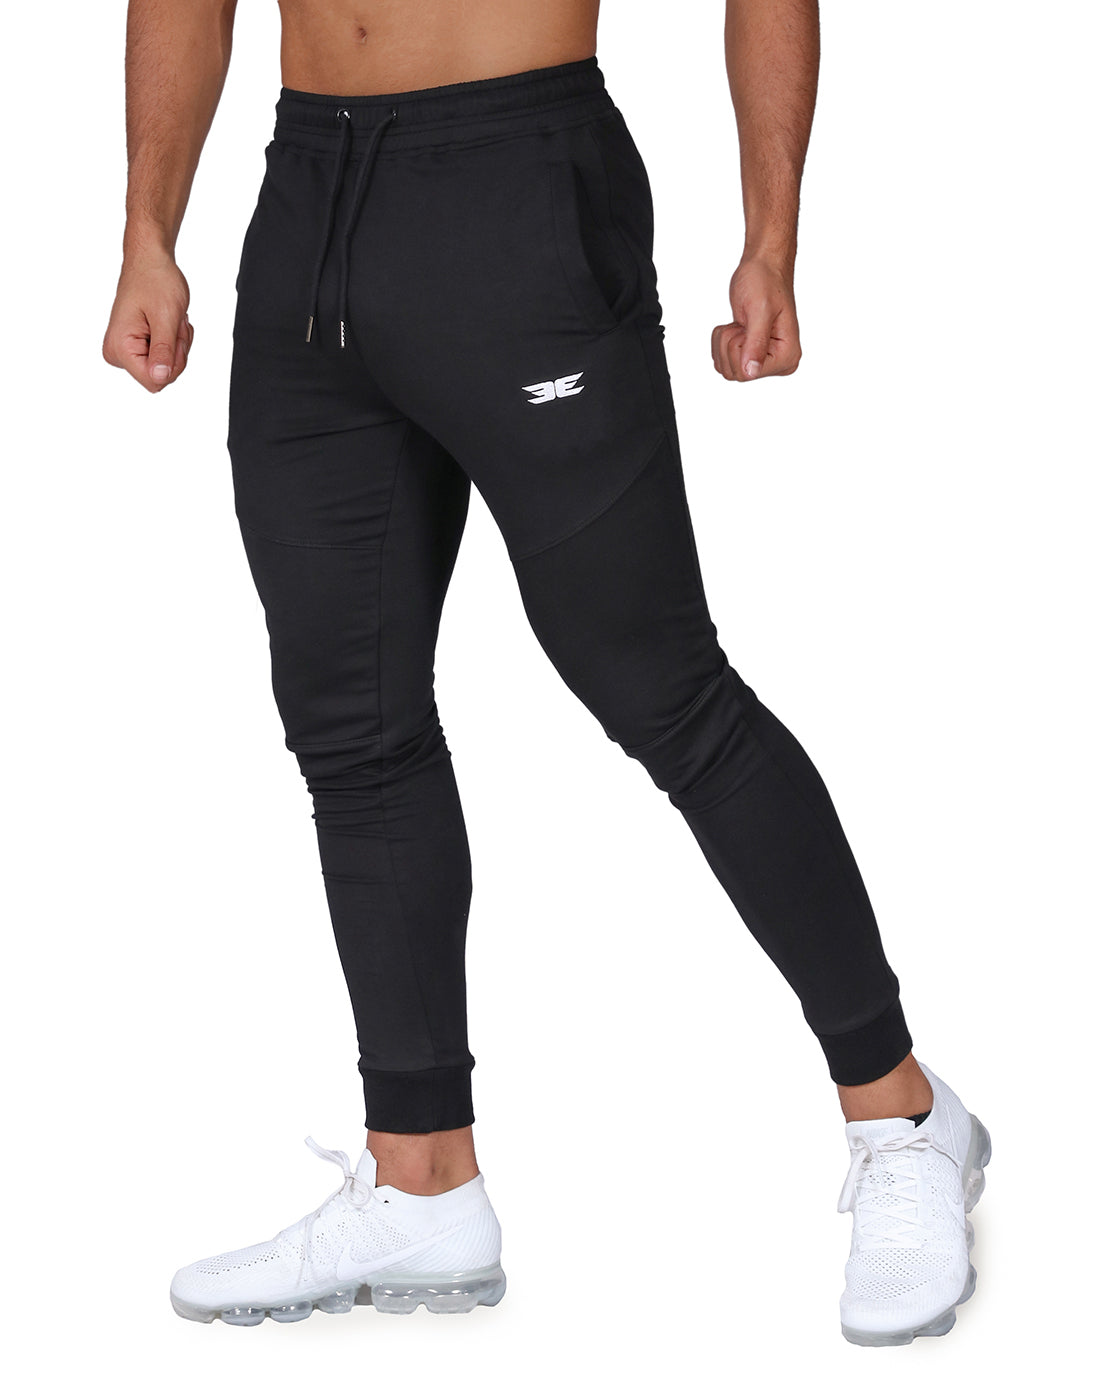 Elite Eleven - Joggers and Pants